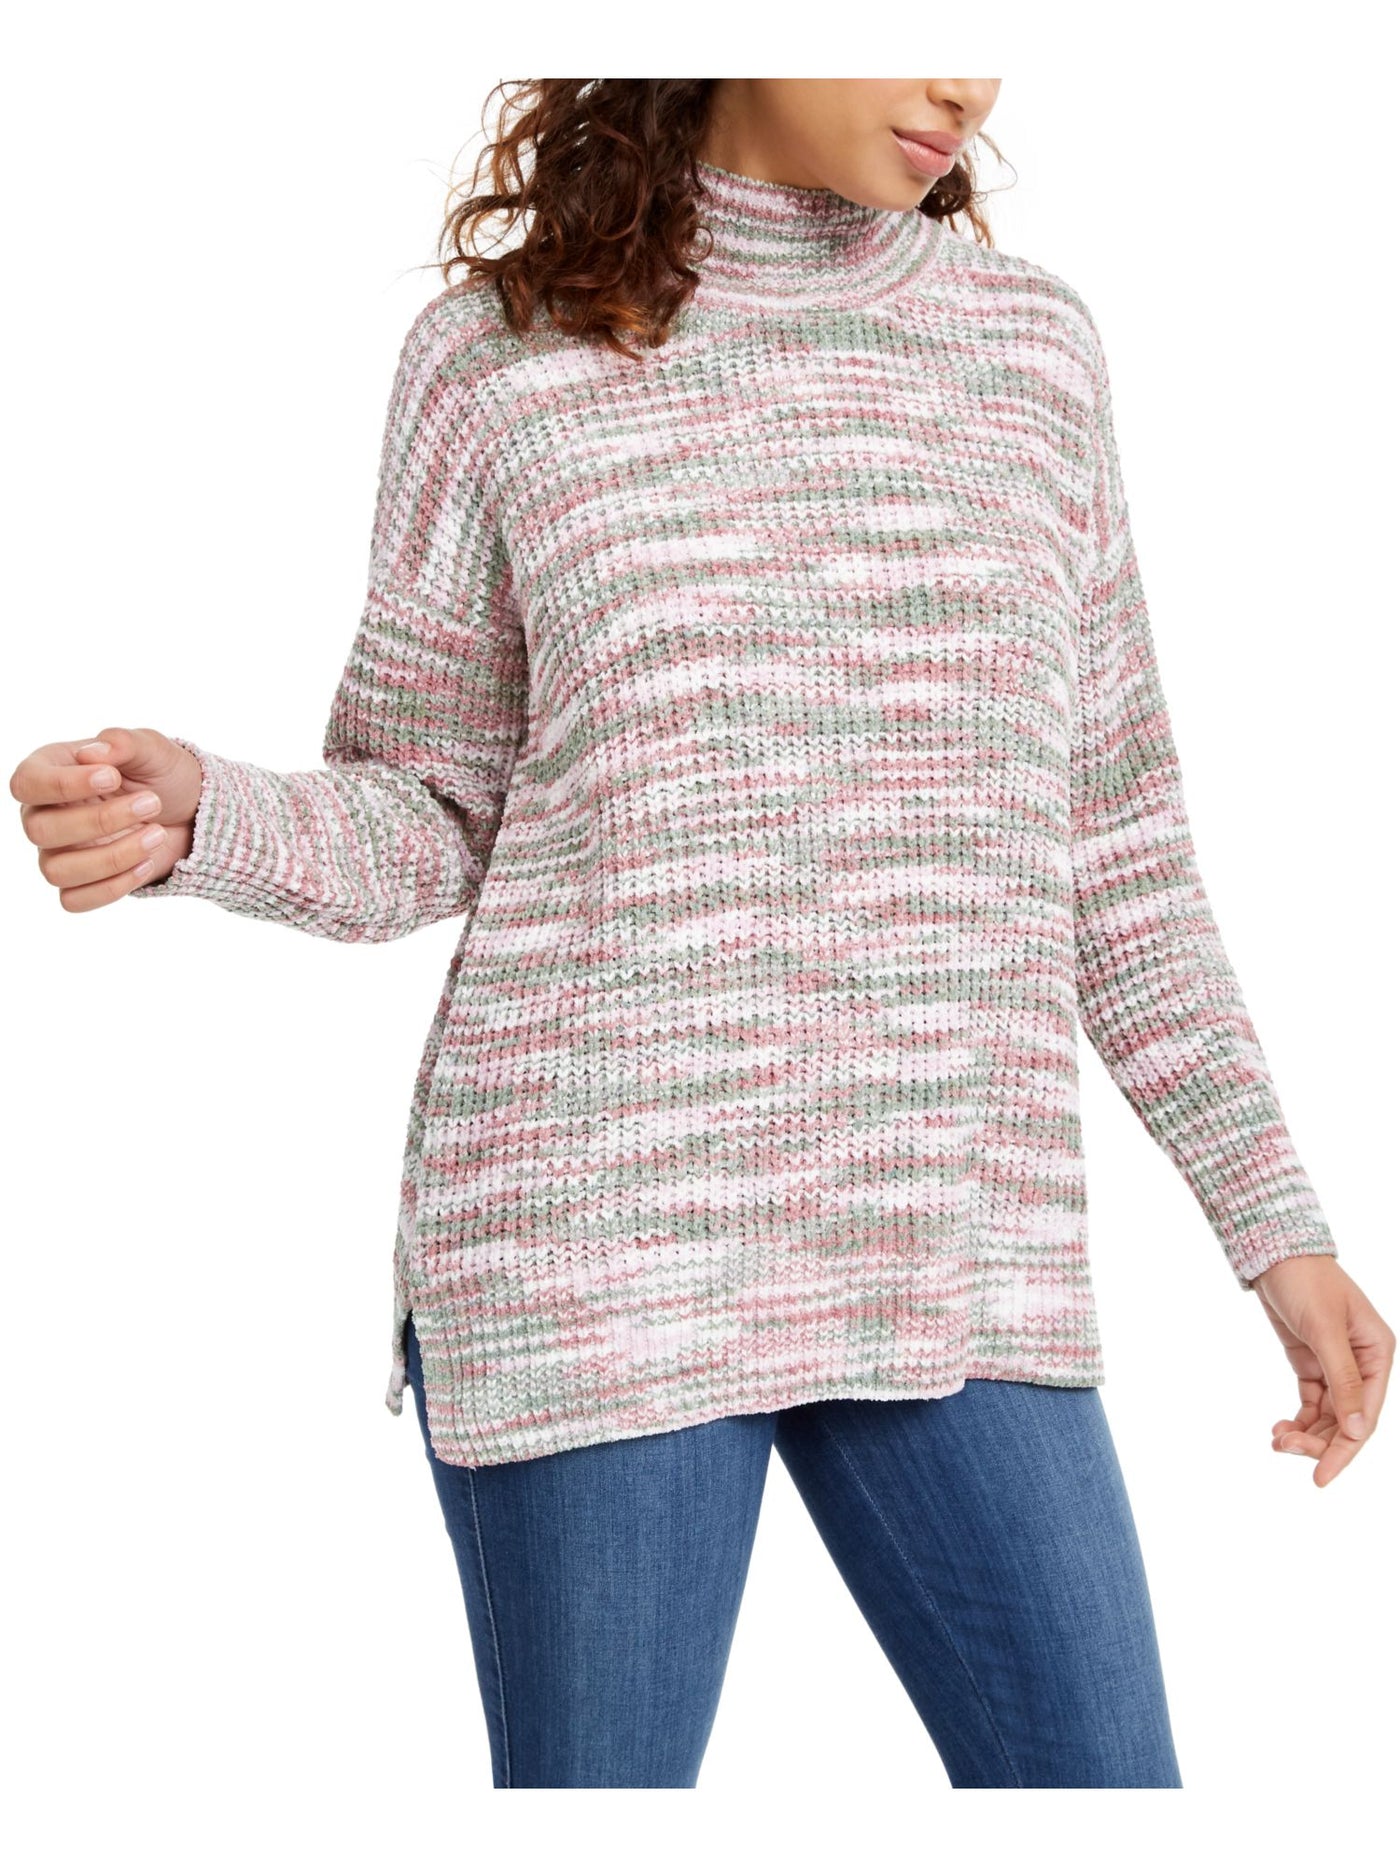 HIPPIE ROSE Womens Pink Printed Long Sleeve Turtle Neck Blouse Juniors XS